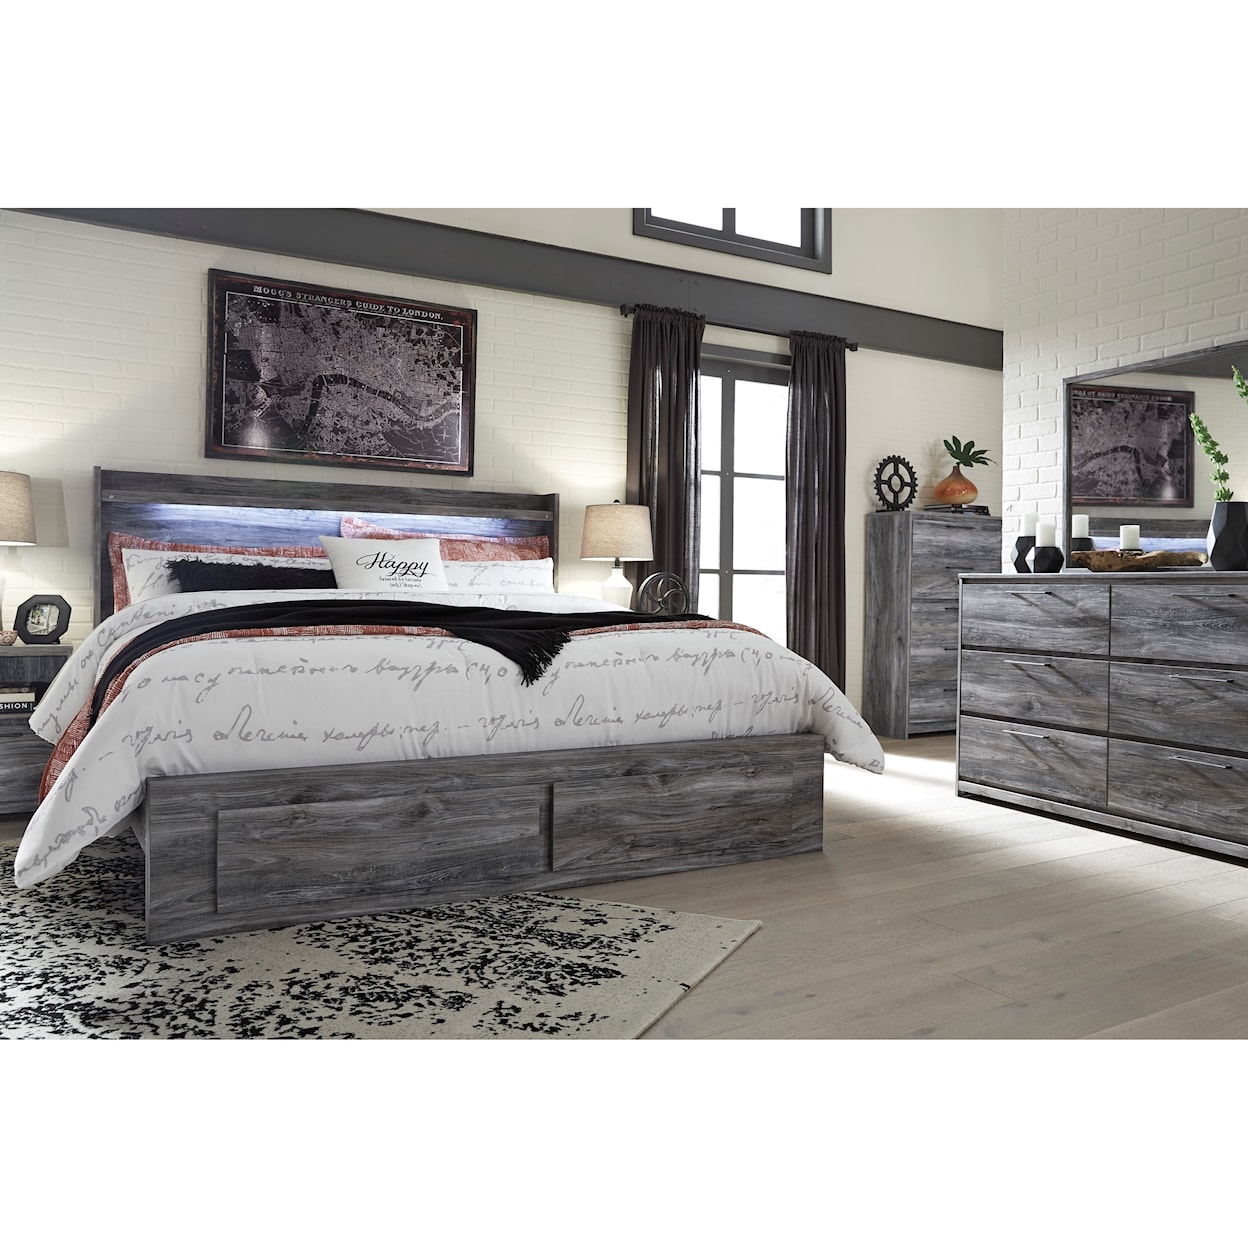 Signature Design by Ashley Furniture Baystorm King Storage Bed with 6 Drawers